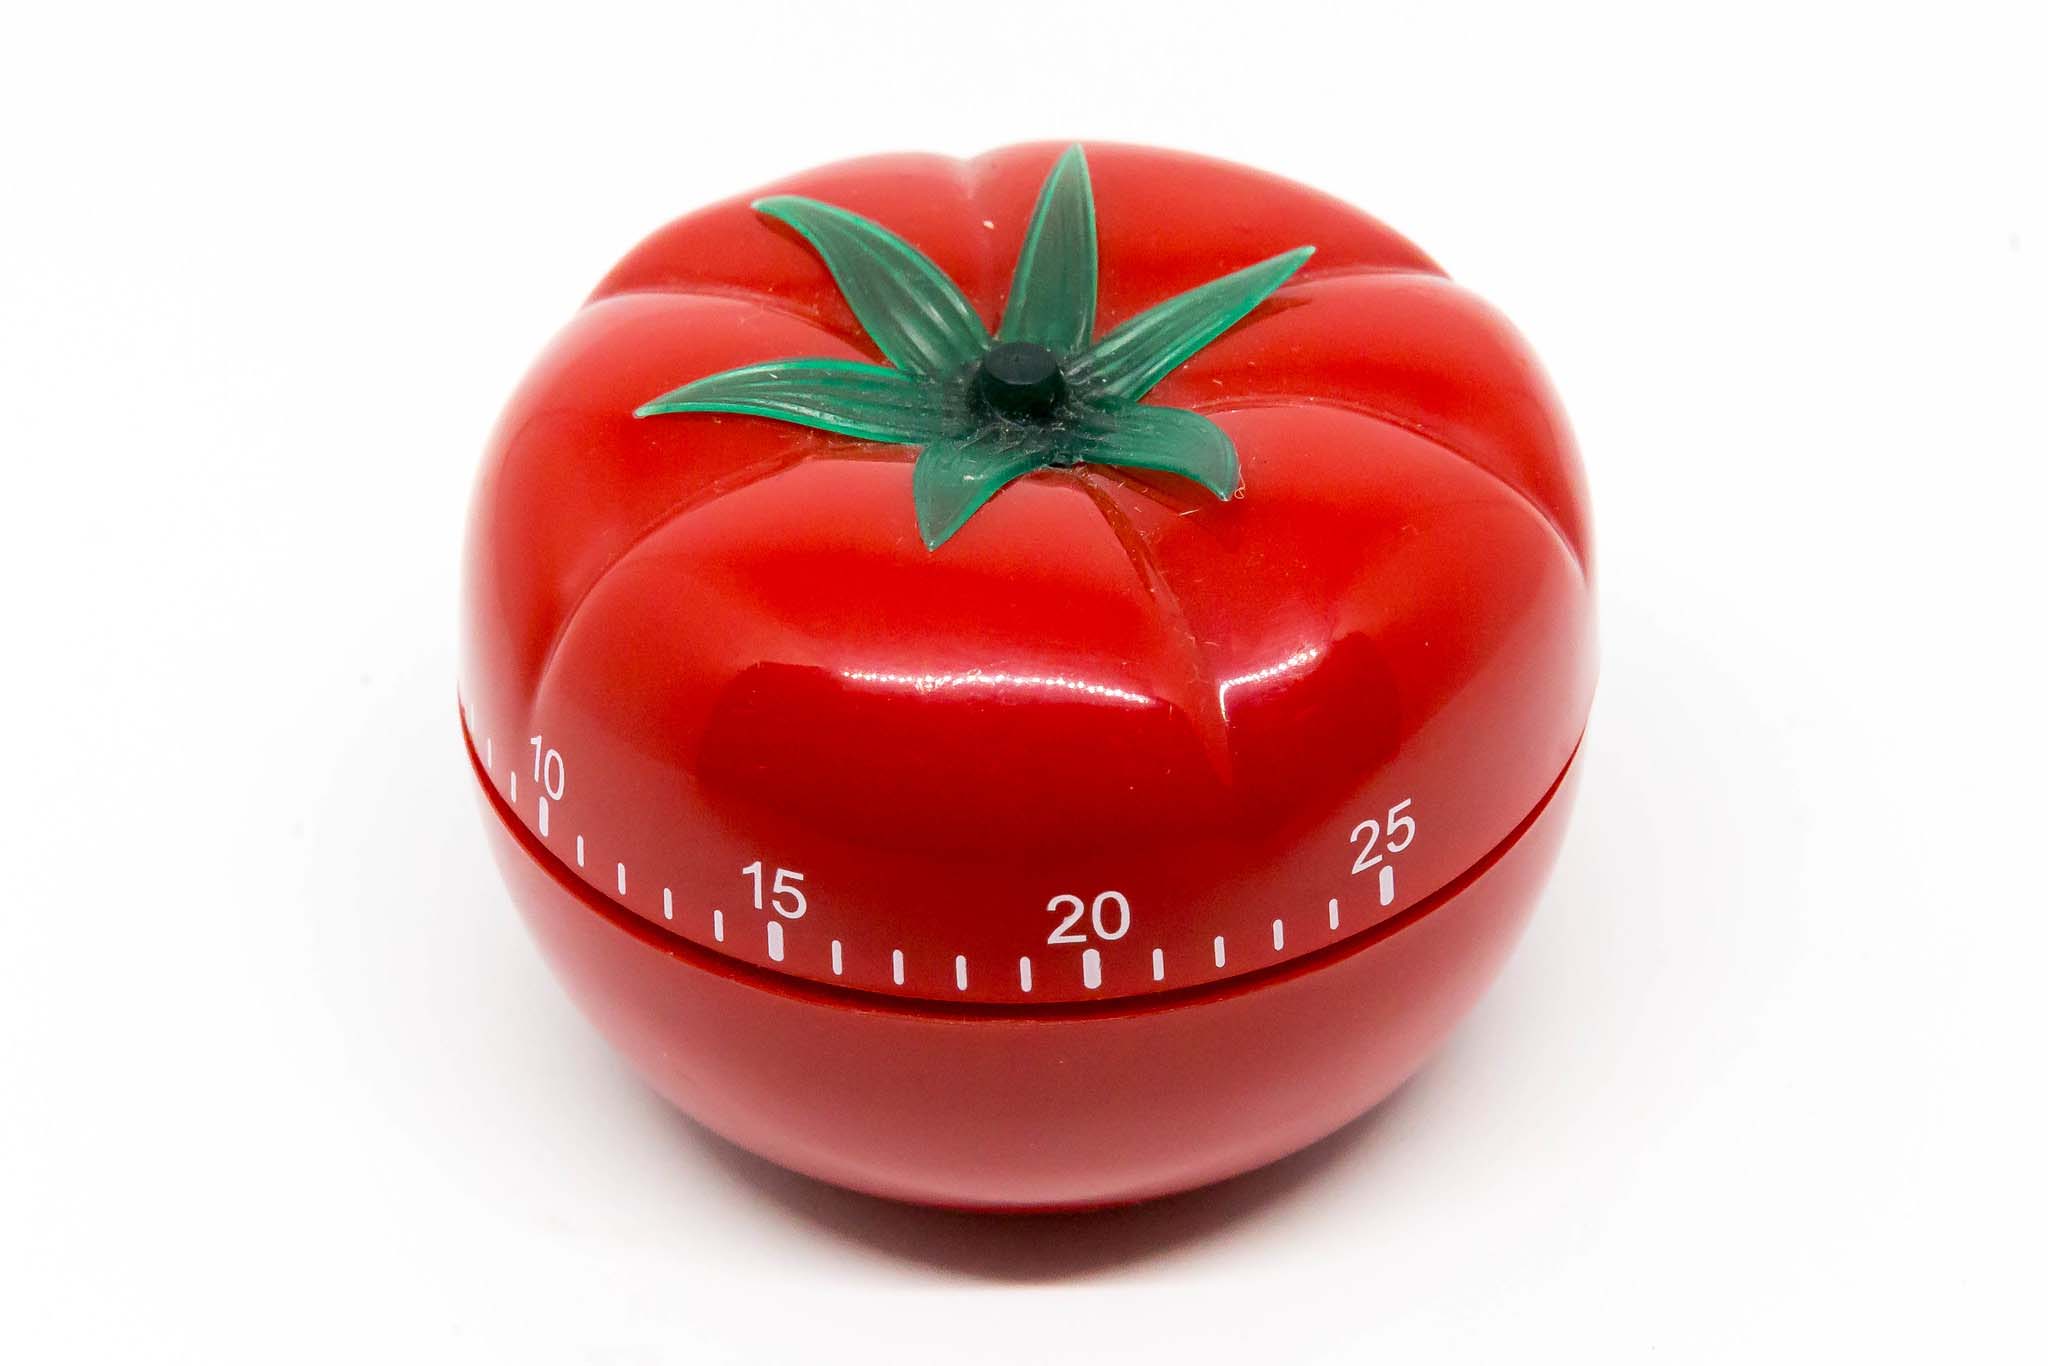 A tomato-shaped timer that goes up to 25 minutes